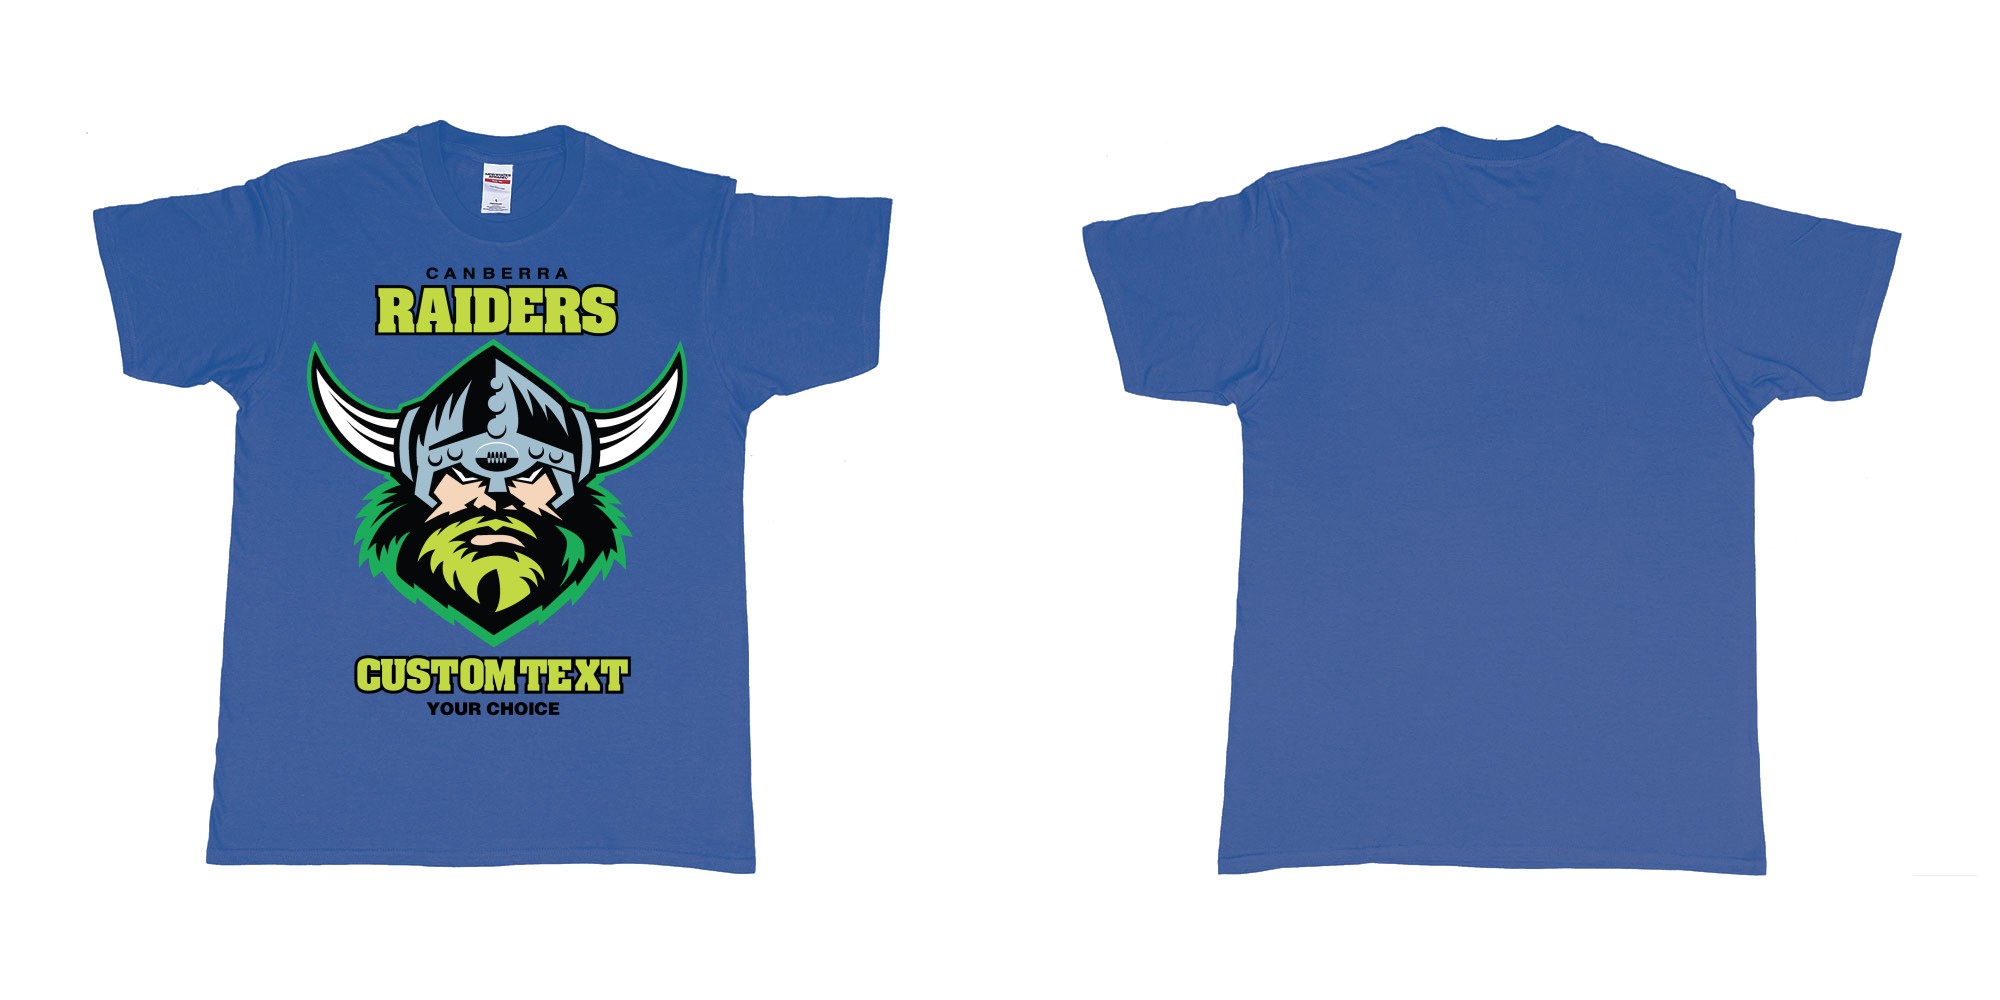 Custom tshirt design canberra raiders nrl logo own printed text near you in fabric color royal-blue choice your own text made in Bali by The Pirate Way